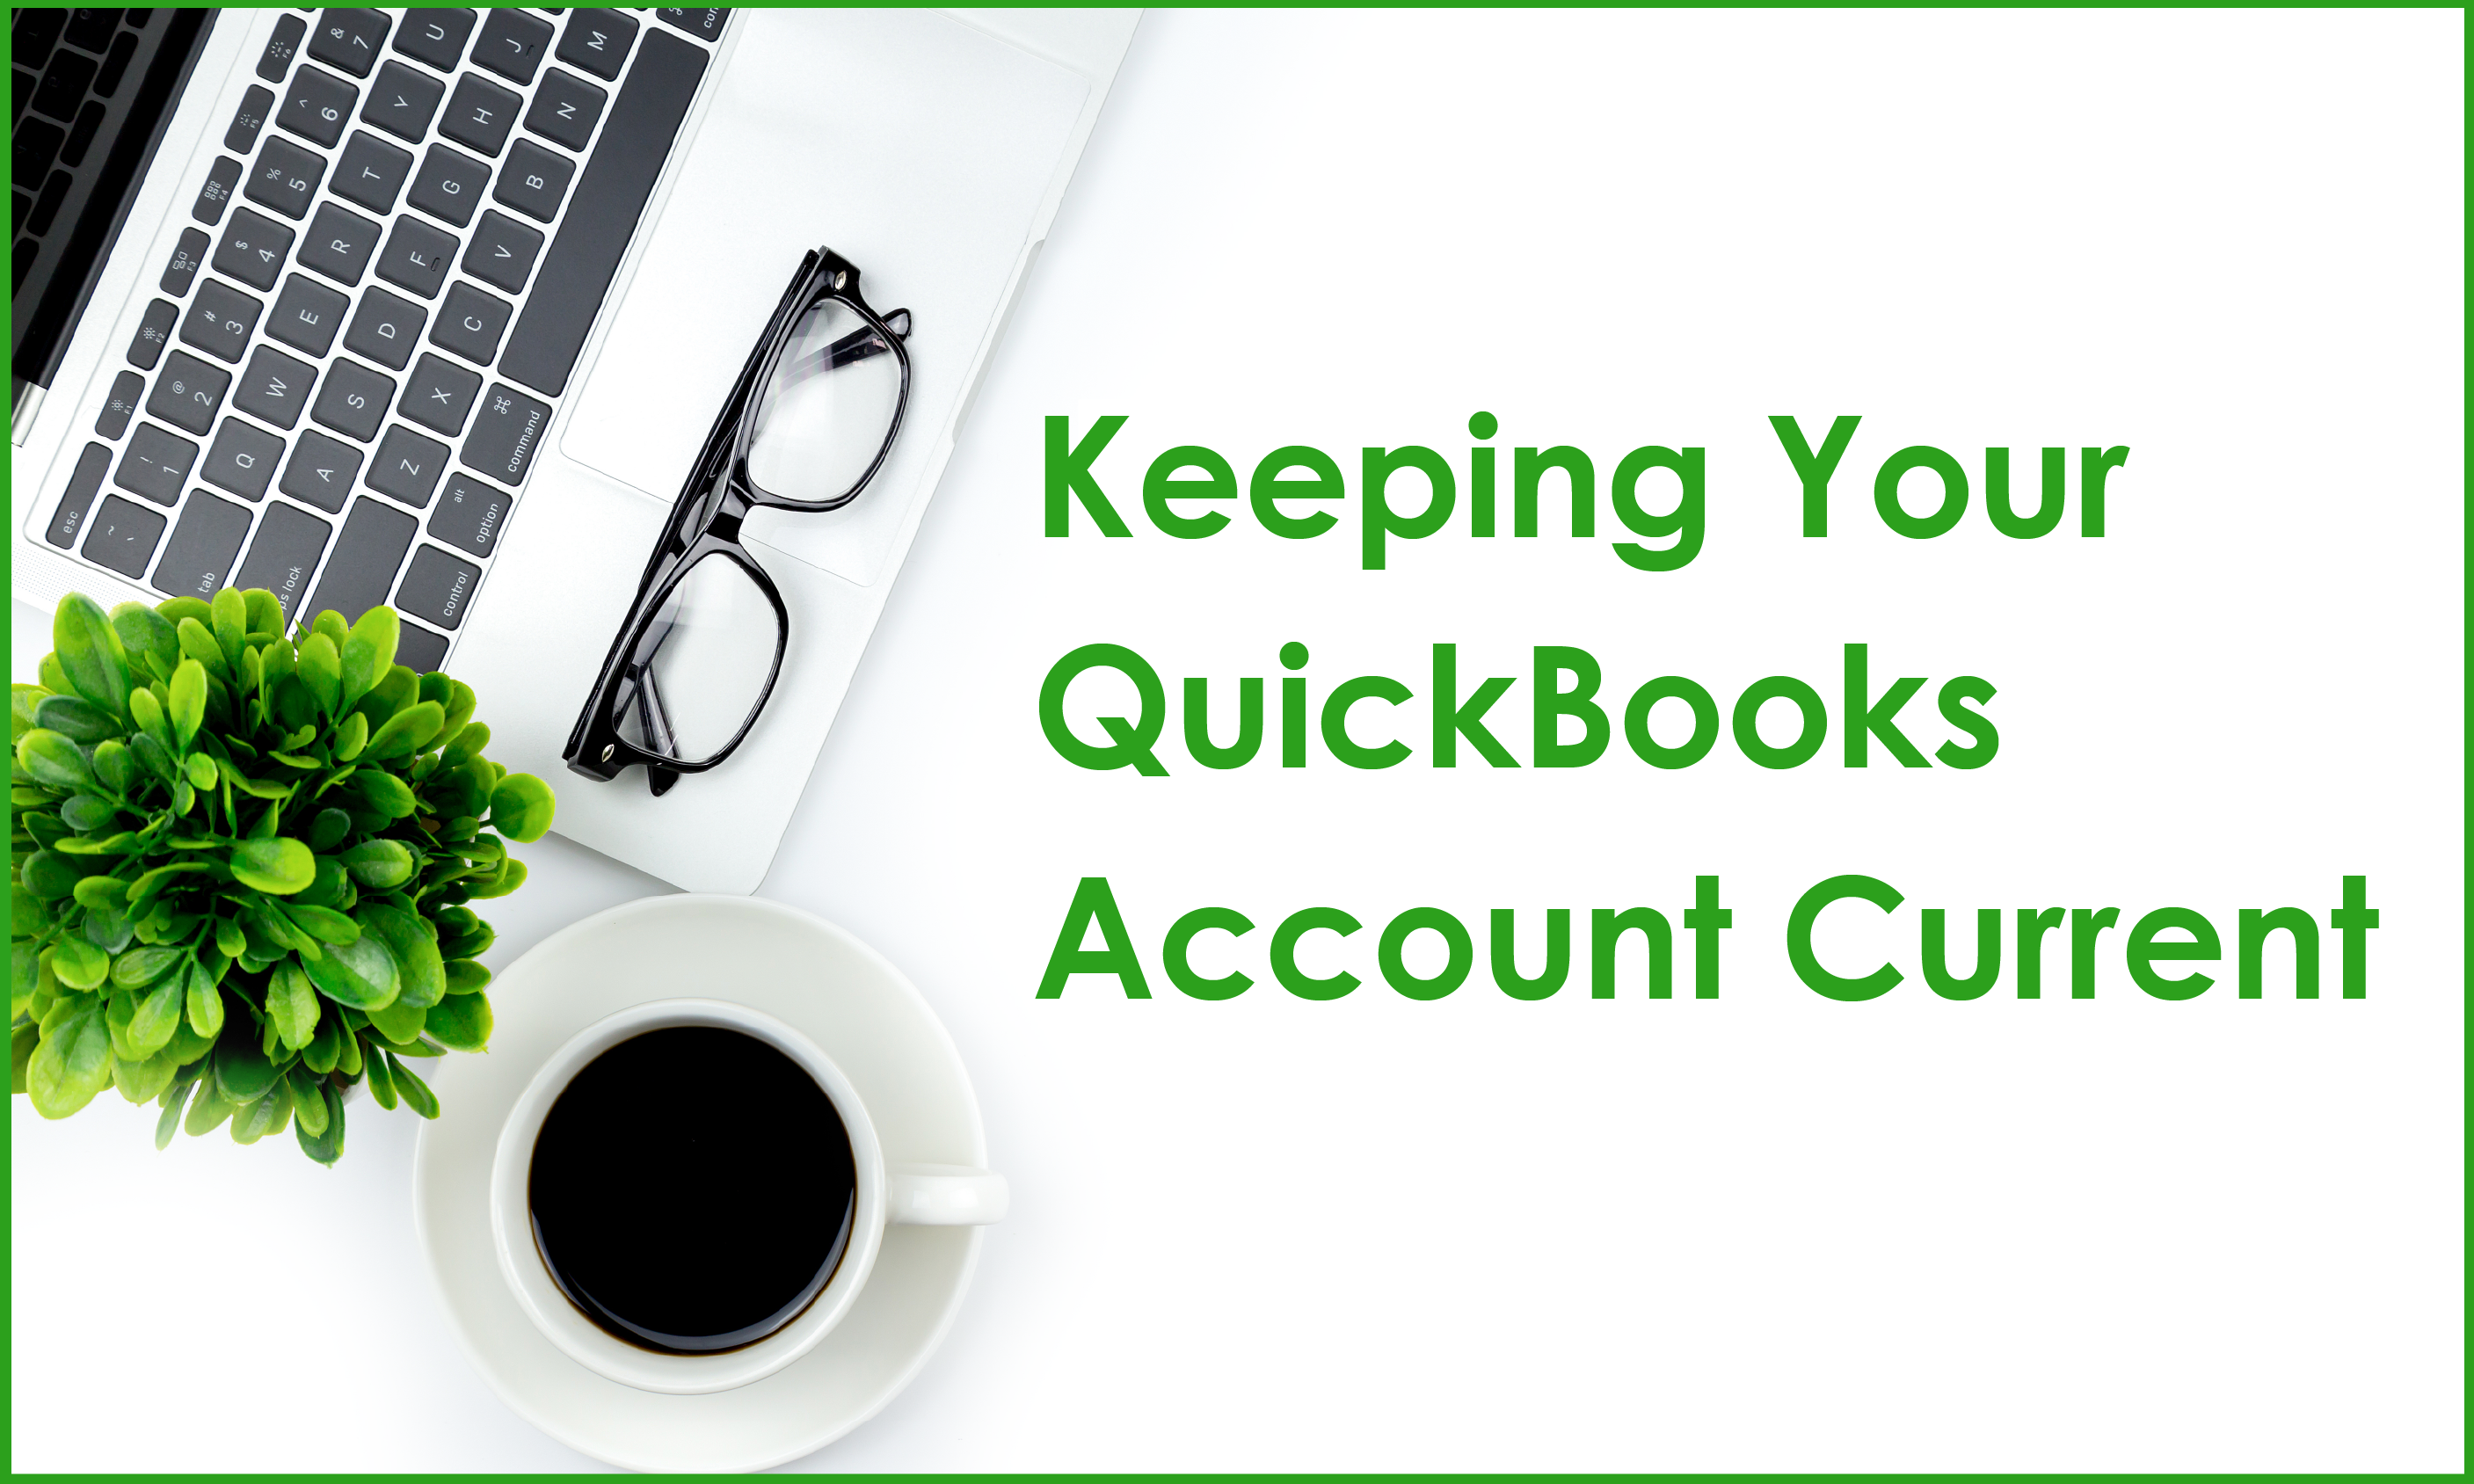 Keeping Your QuickBooks Account Current